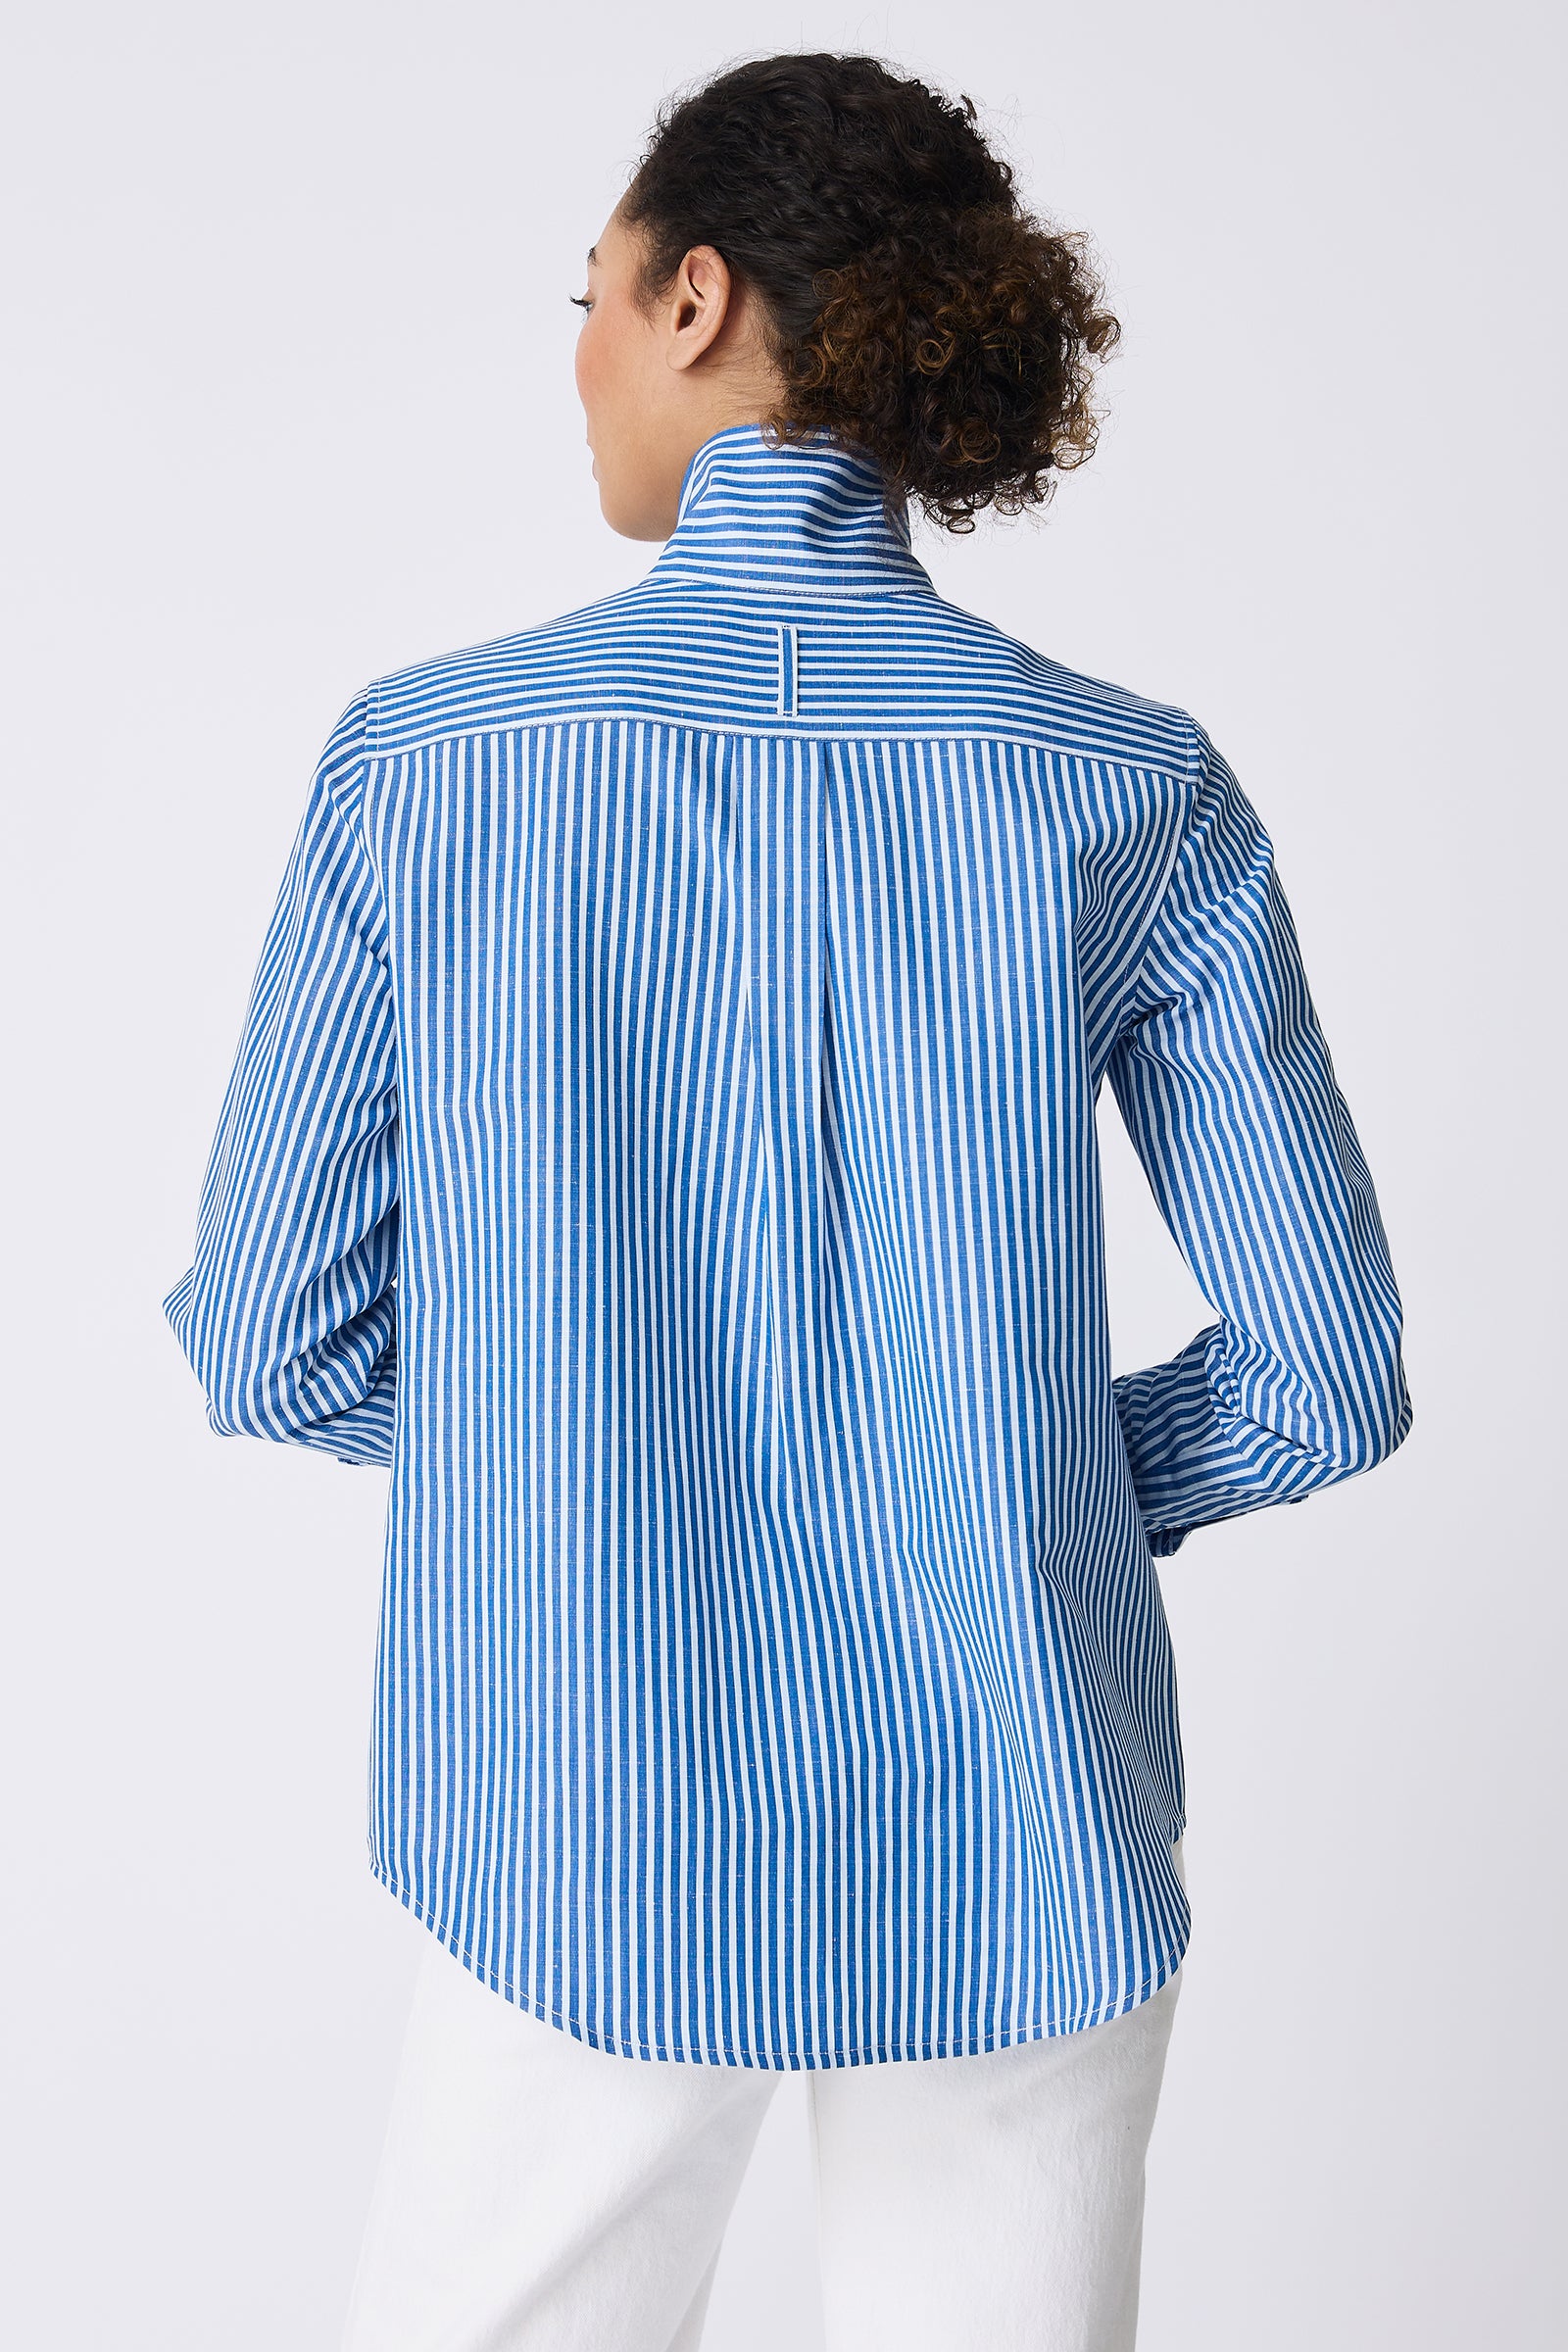 Kal Rieman Ginna Box Pleat Shirt in Cabana Stripe Blue on model smiling front view